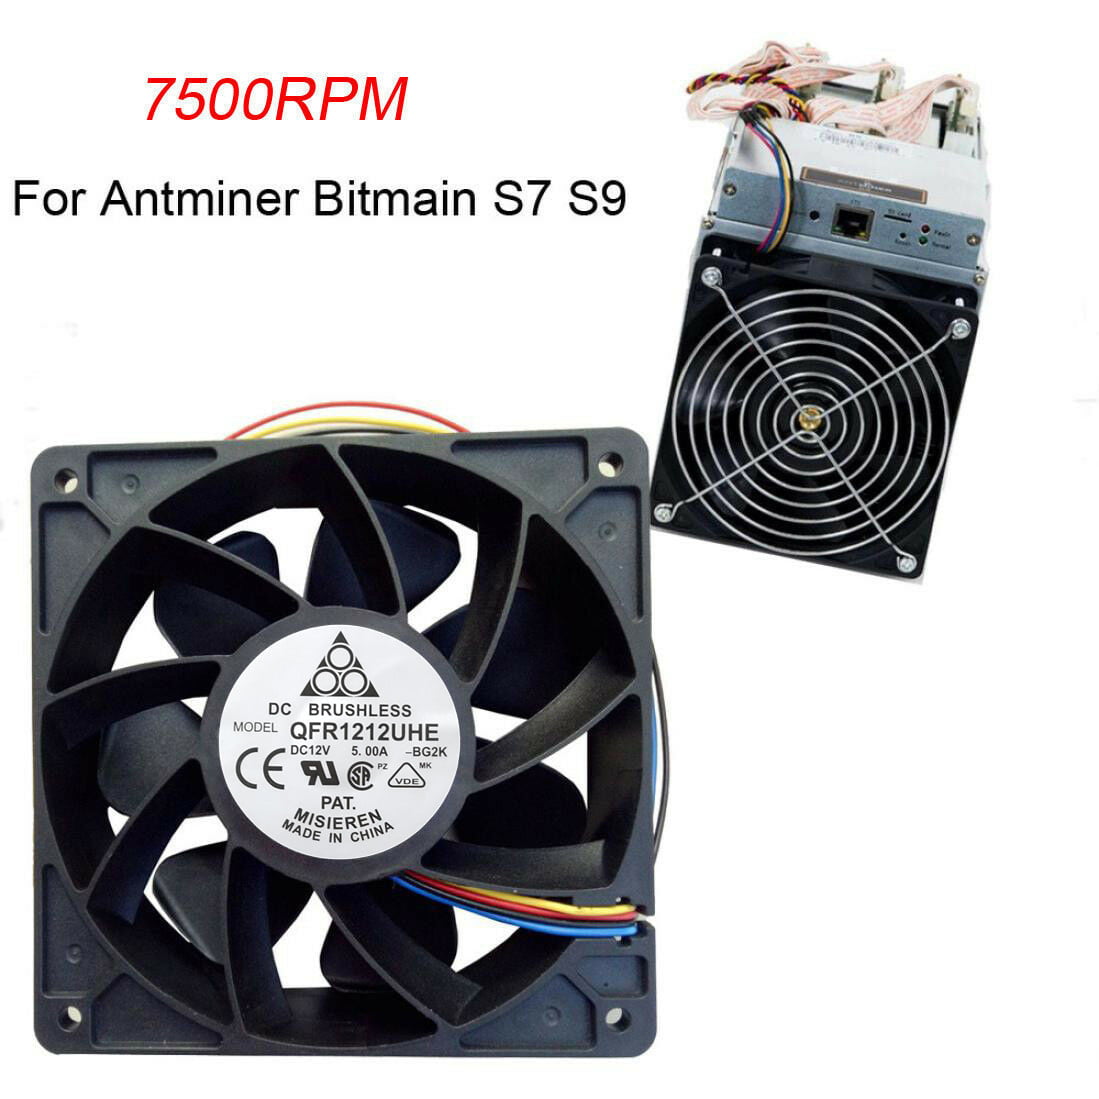 Cooling Fan Replacement 7500RPM 4-pin Connector For Antminer Bitmain S7 S9 